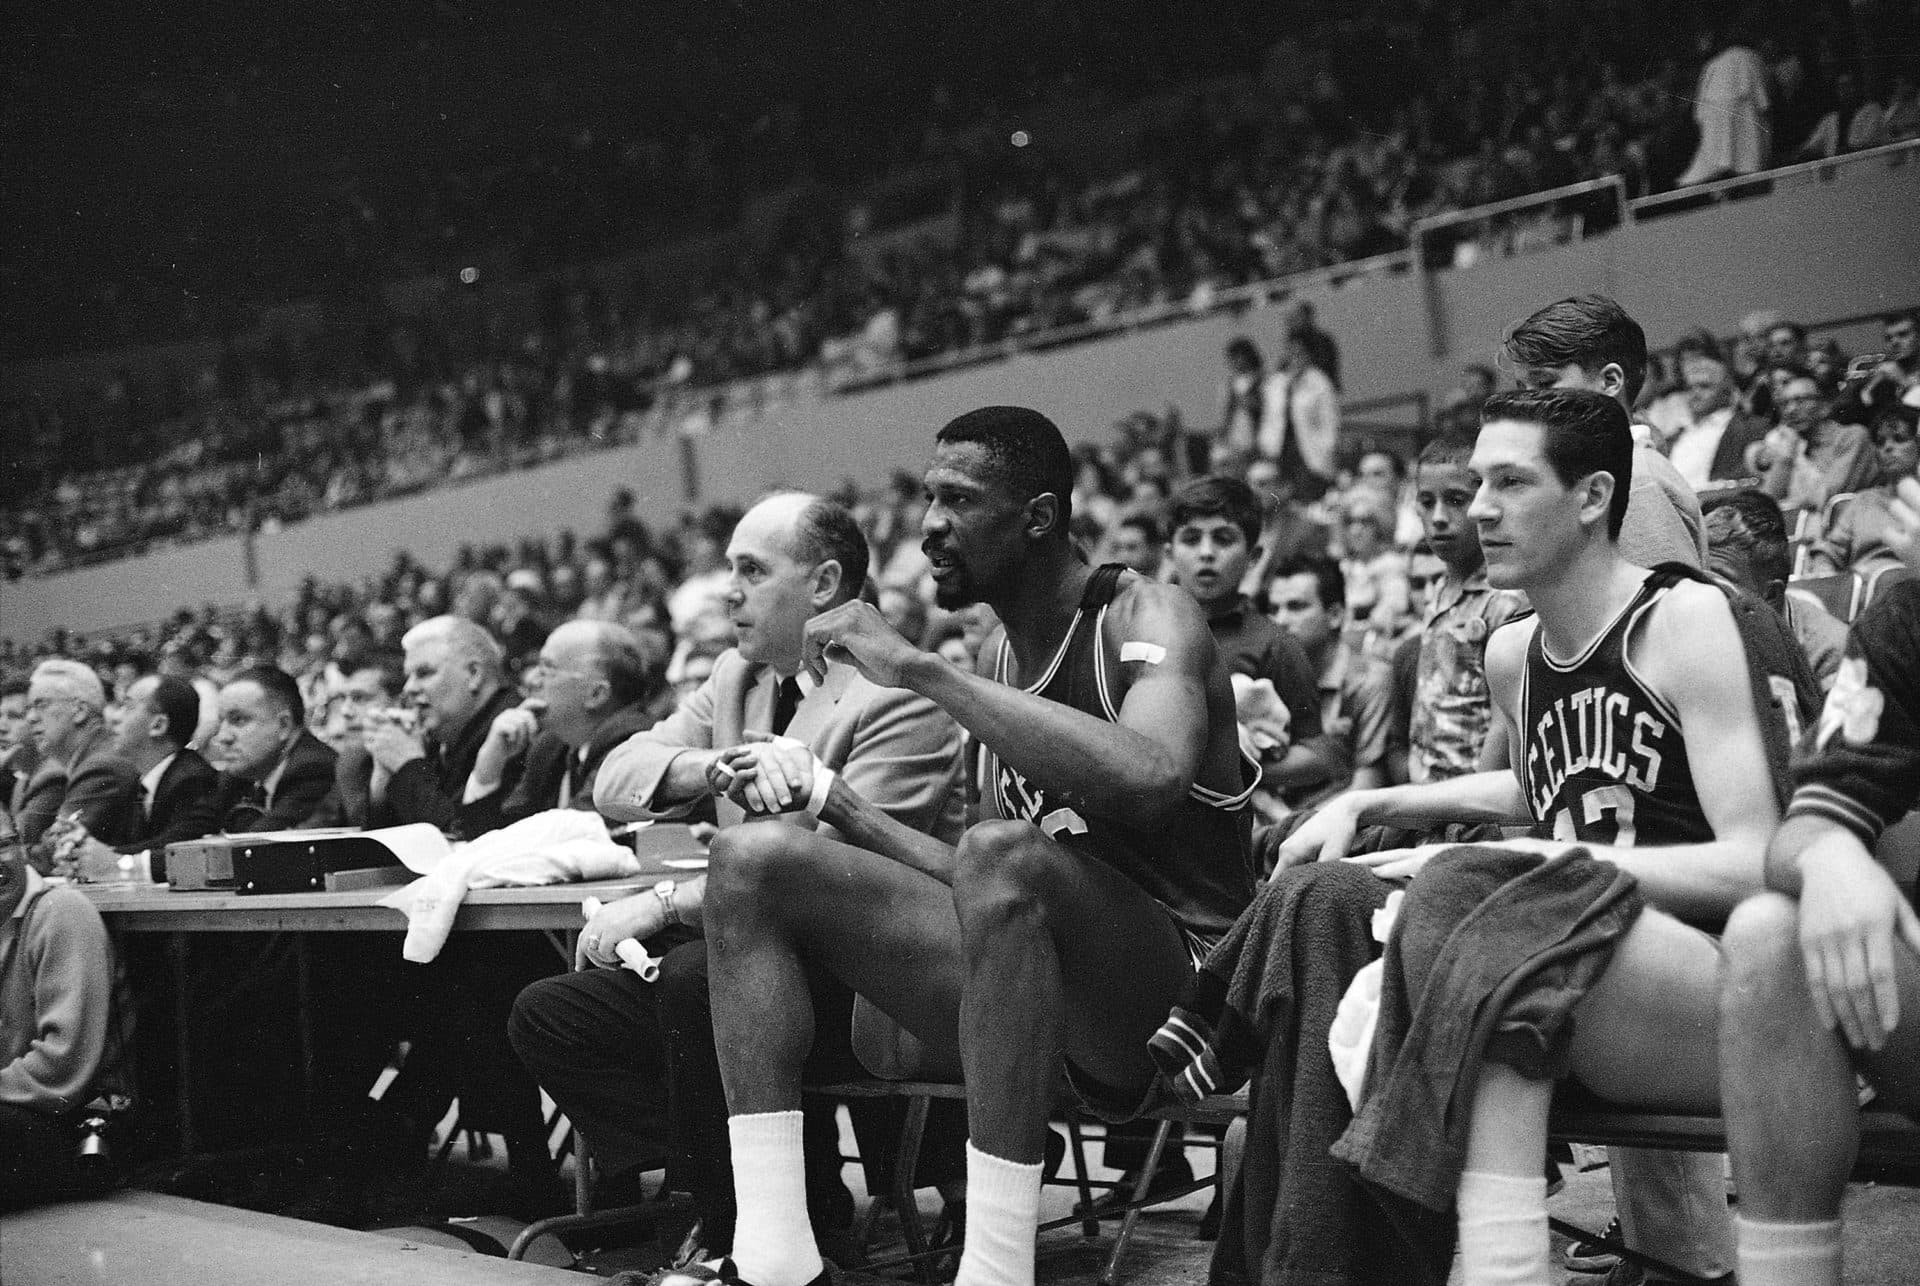 Neither Boston Coach Red Auerbach or center Bill Russell can take his eyes from the action as they shake hands on the bench in the final seconds of the Celtics' 112-99 win over the Lakers in an NBA playoff game at Los Angeles April 23, 1965. Russell had just left the game -- for the first time -- with less than a minute to play. Boston's win gave them a 3-1 lead in the best of 7 series. (Ed Widdis/AP)